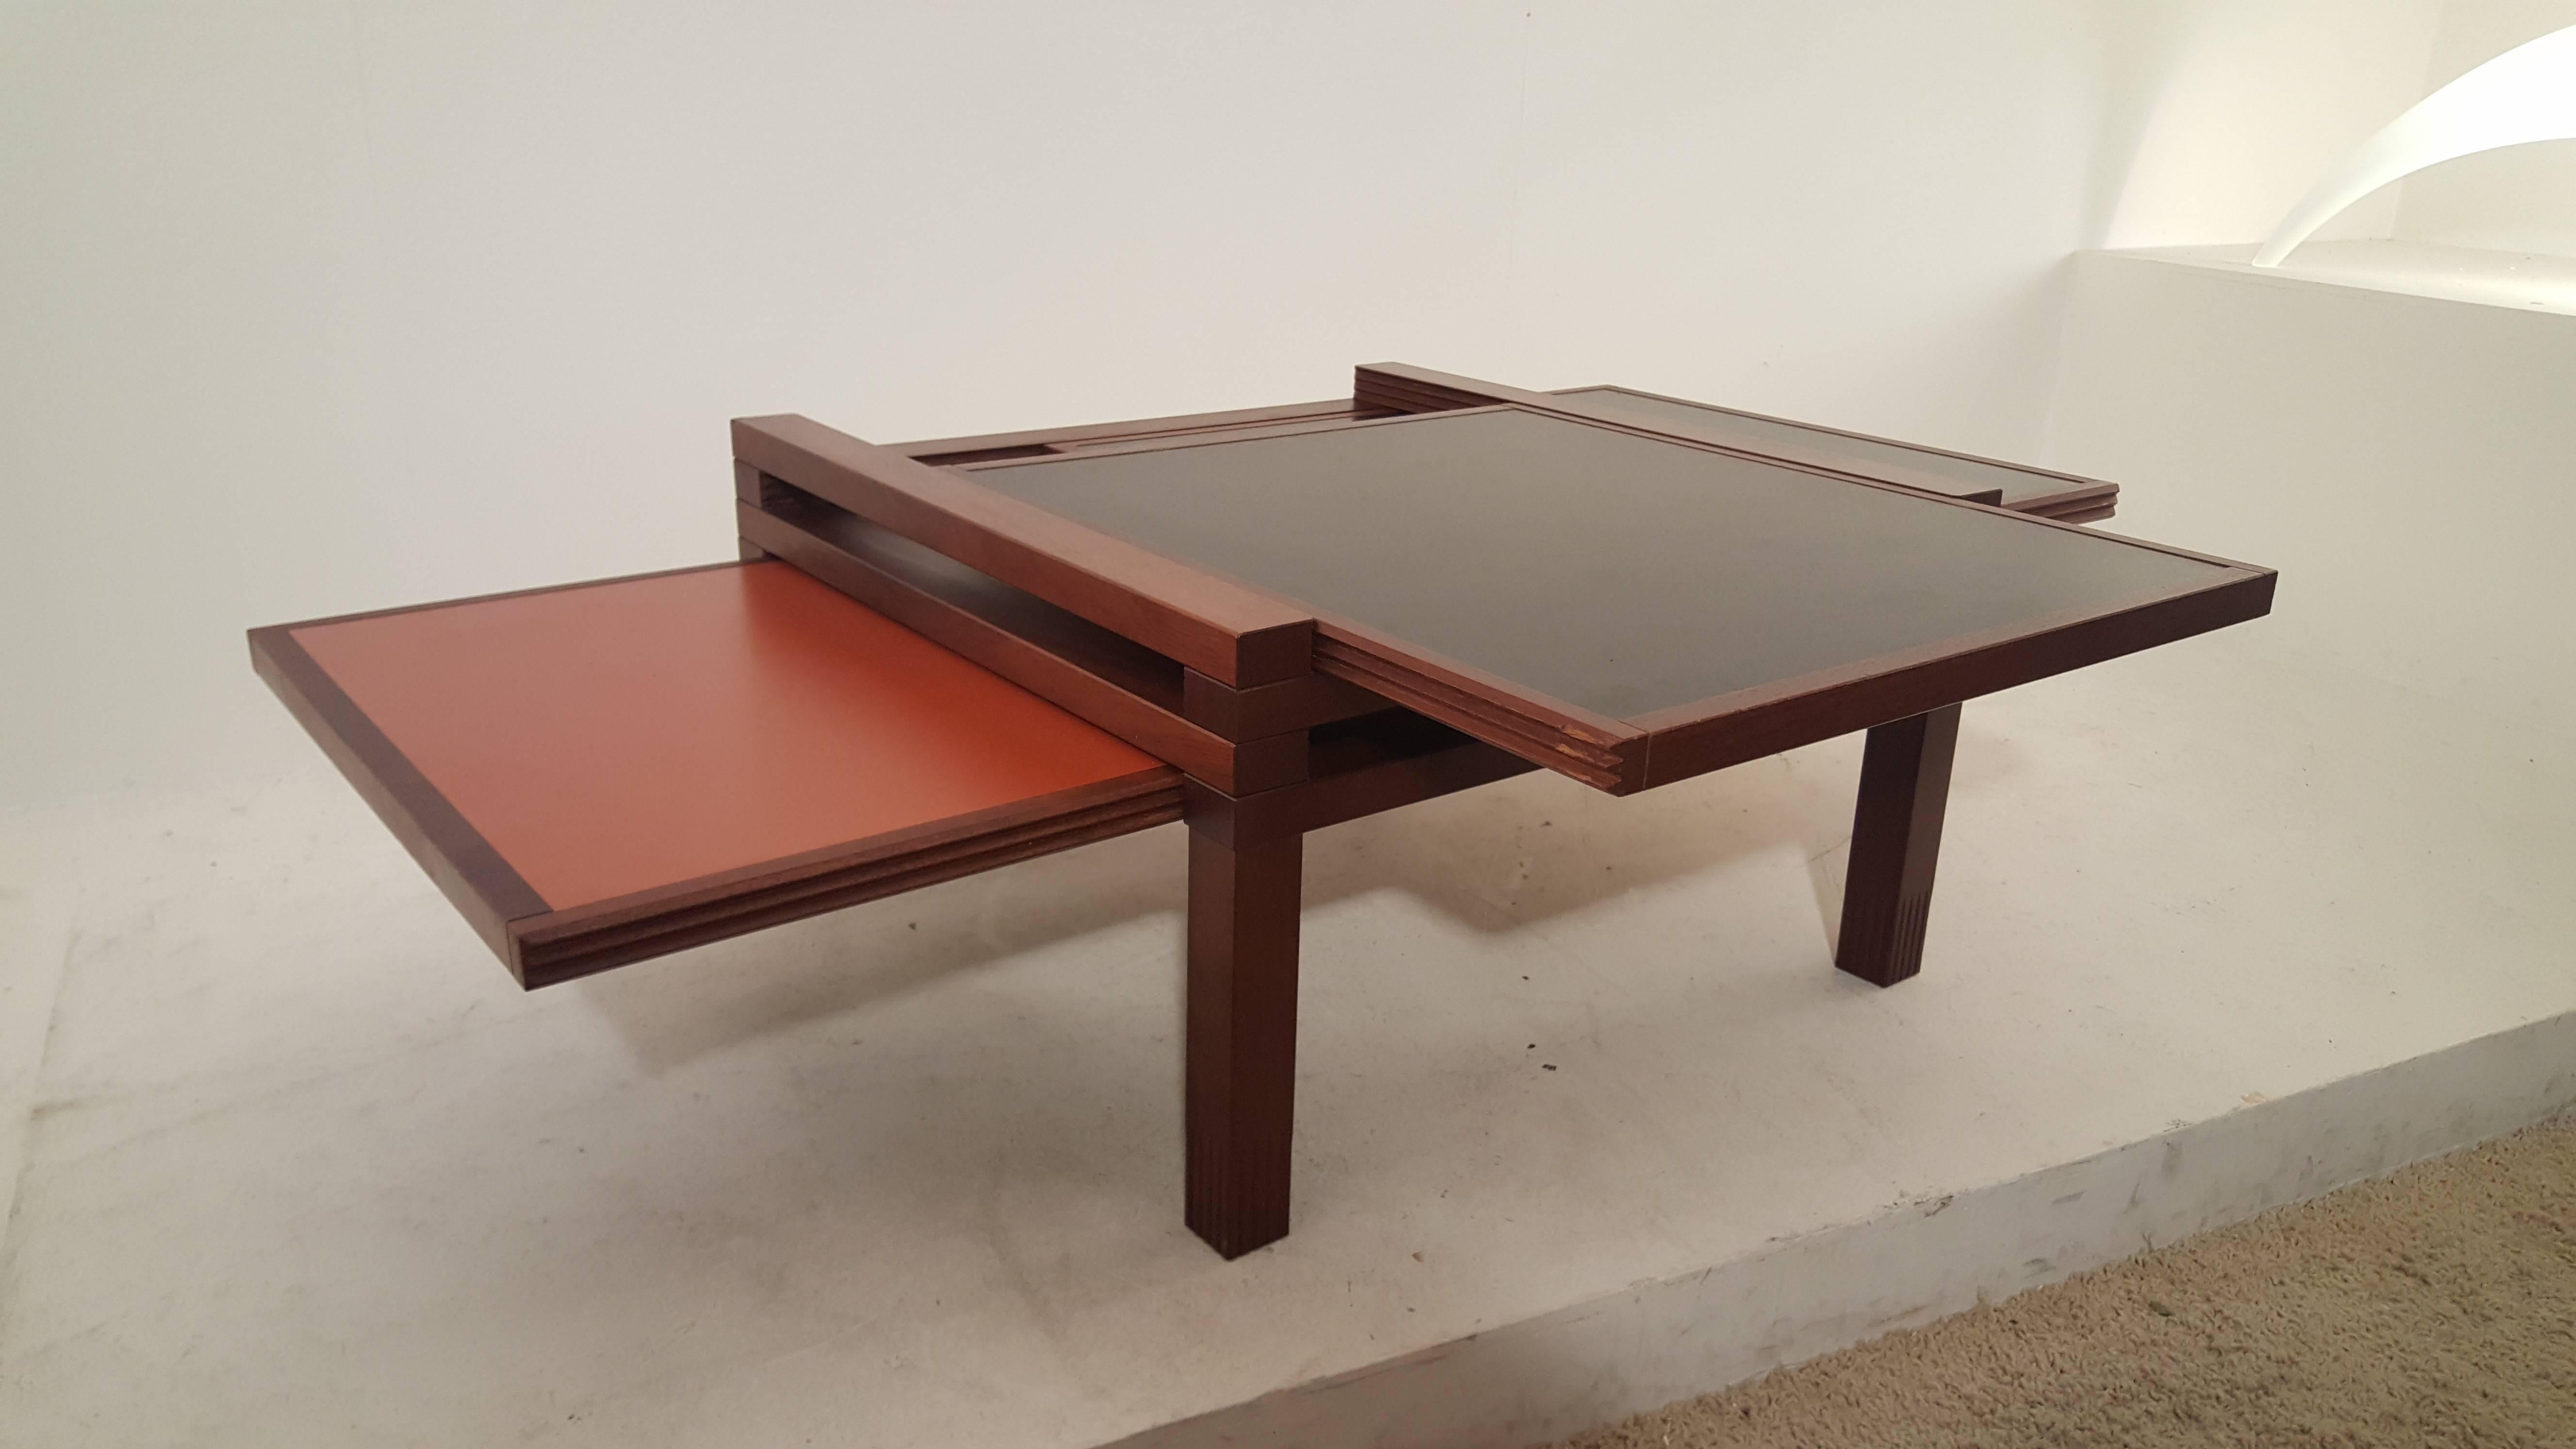 Very good looking coffee table by Bernard Vuarnesson for Bellato. The table is made from Iroko wood with black and (old) orange laminated tops. This model has a total of four tops/drawers that can be positioned in different ways. A dynamic table